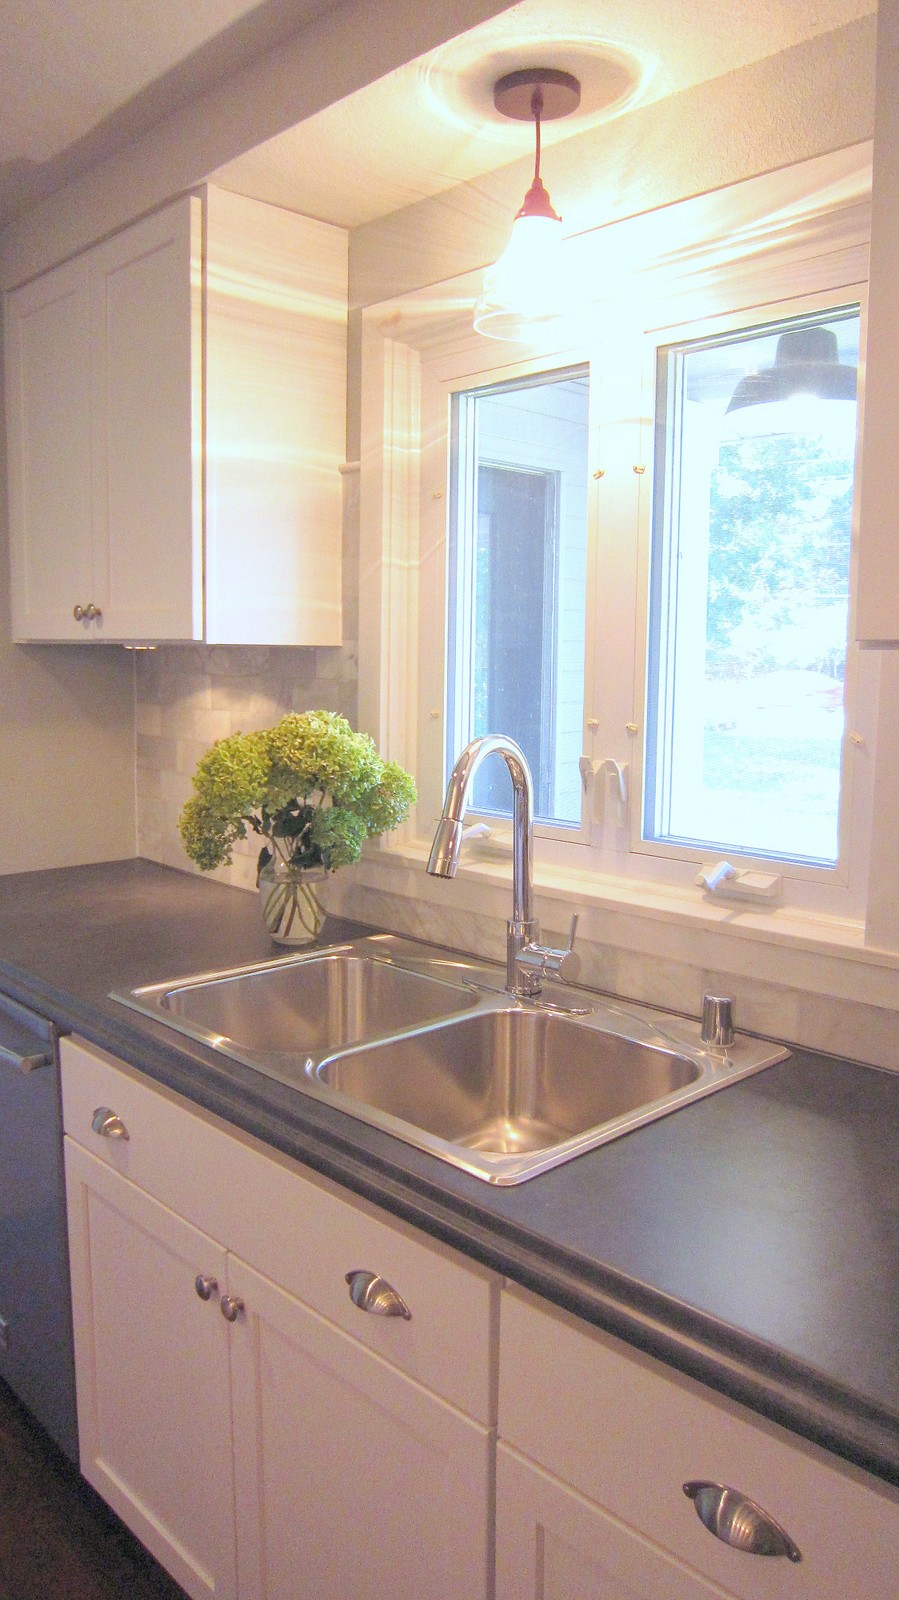 BEFORE & AFTER: Affordable Farmhouse Kitchen Renovation - Gray and White - Granite and Laminate Counters - Marble Backsplash